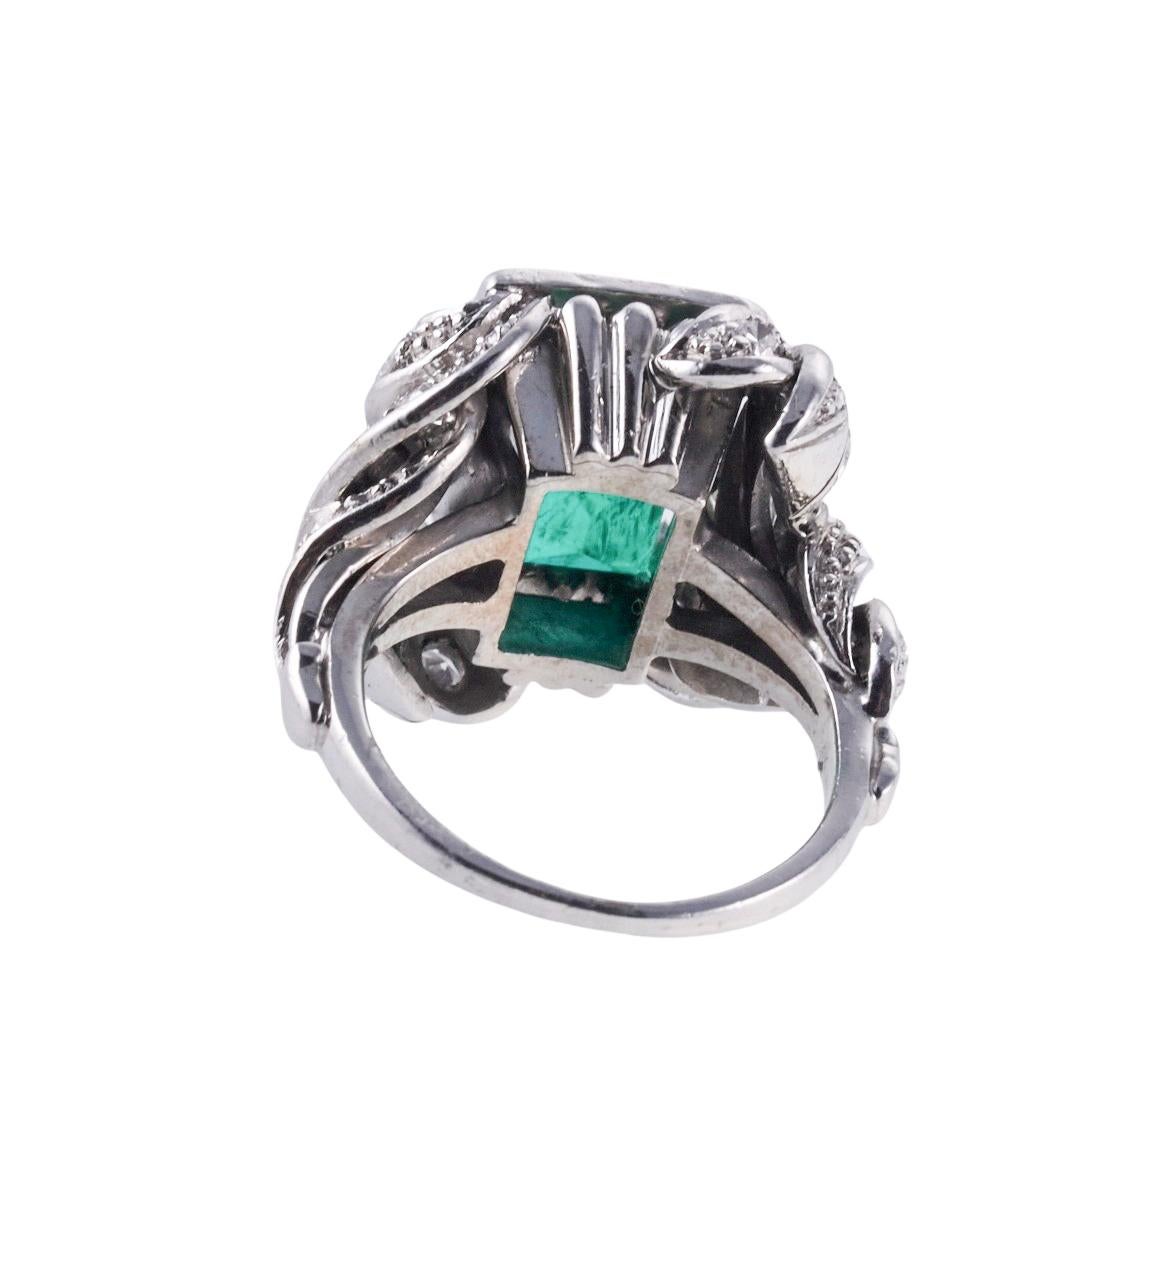 Emerald Cut Midcentury 4.77 Carat Emerald Diamond Gold Cocktail Ring For Sale